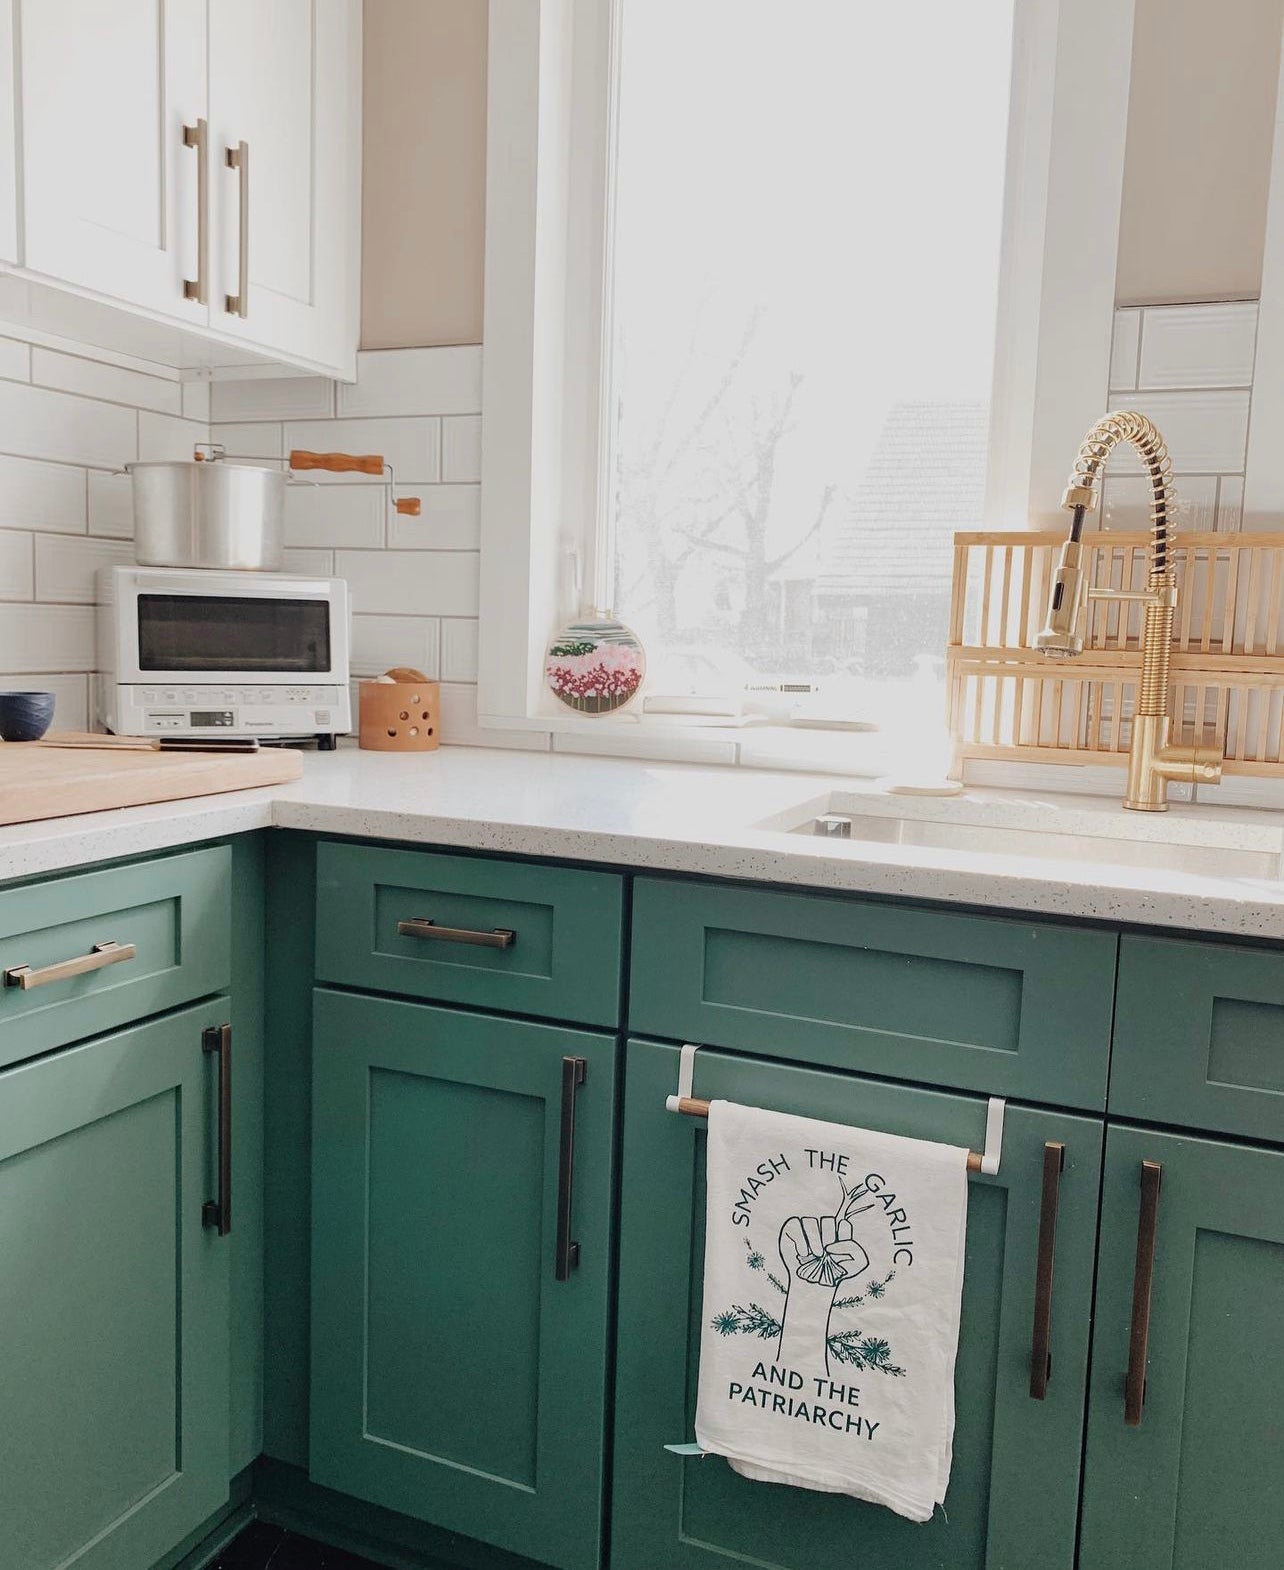 A "Smash the Garlic and the Patriarchy" tea towel hangs in a kitchen with green cabinets